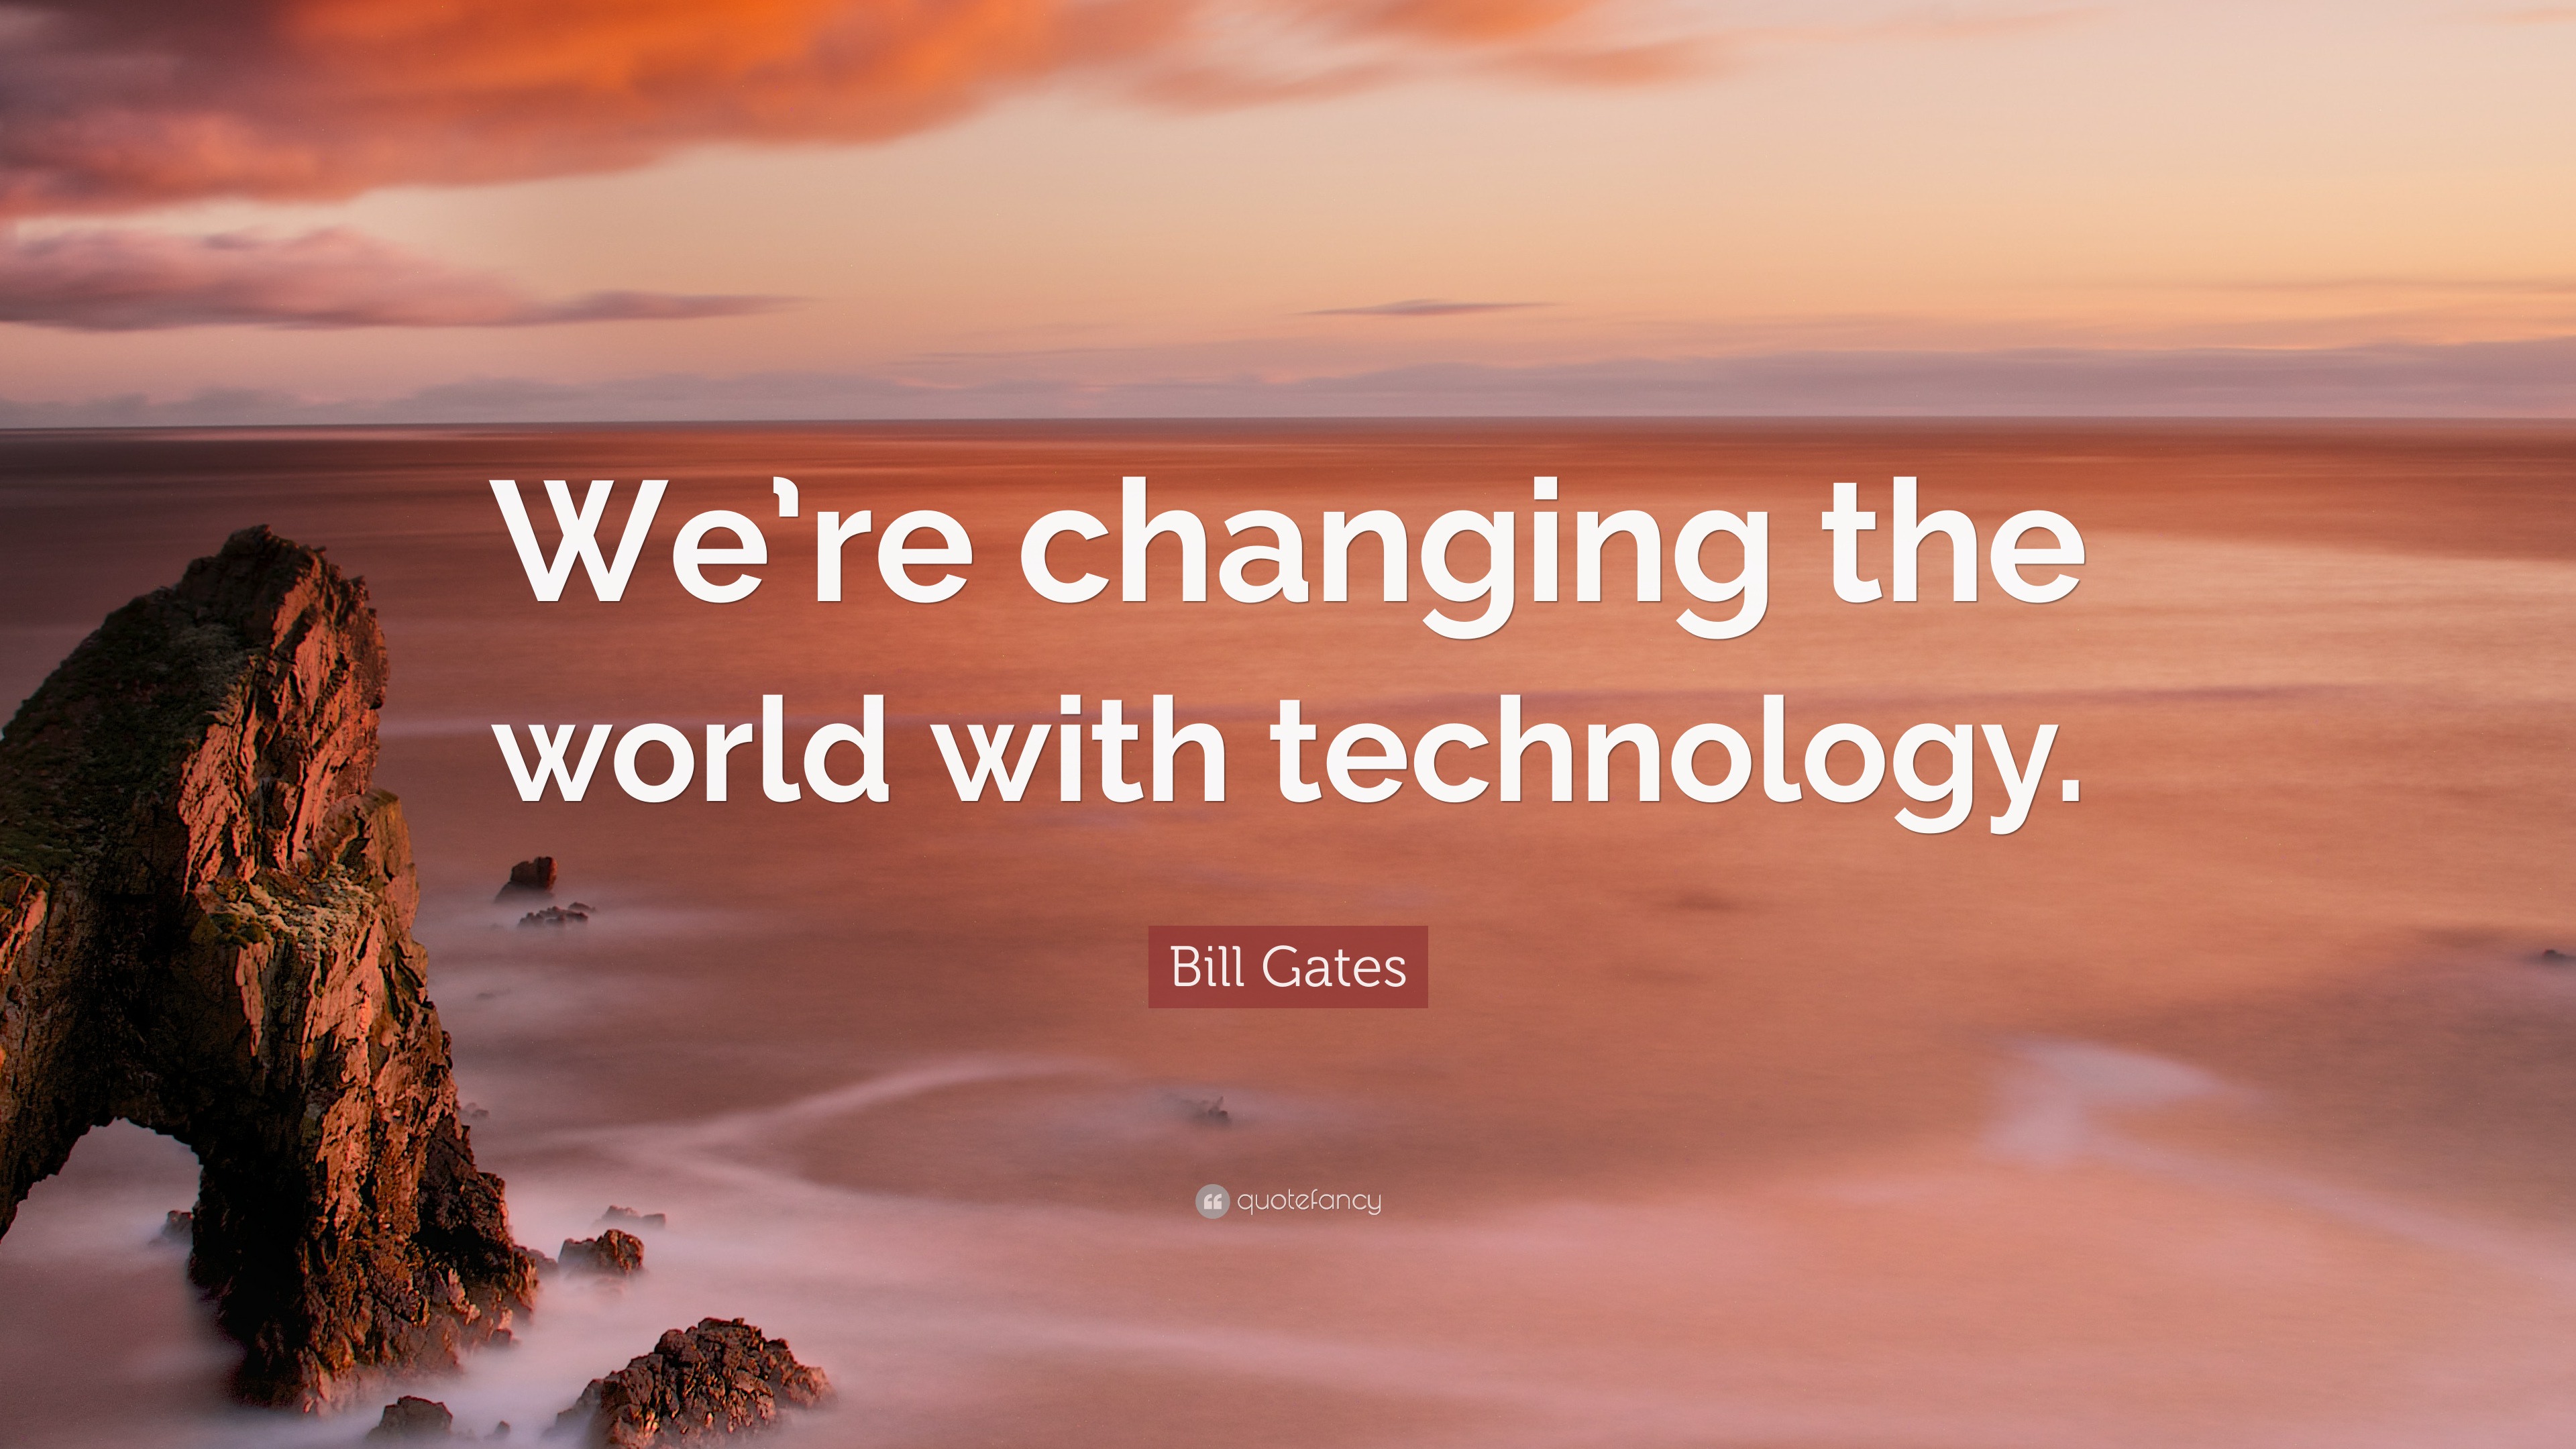 Bill Gates Quote: "We're changing the world with ...